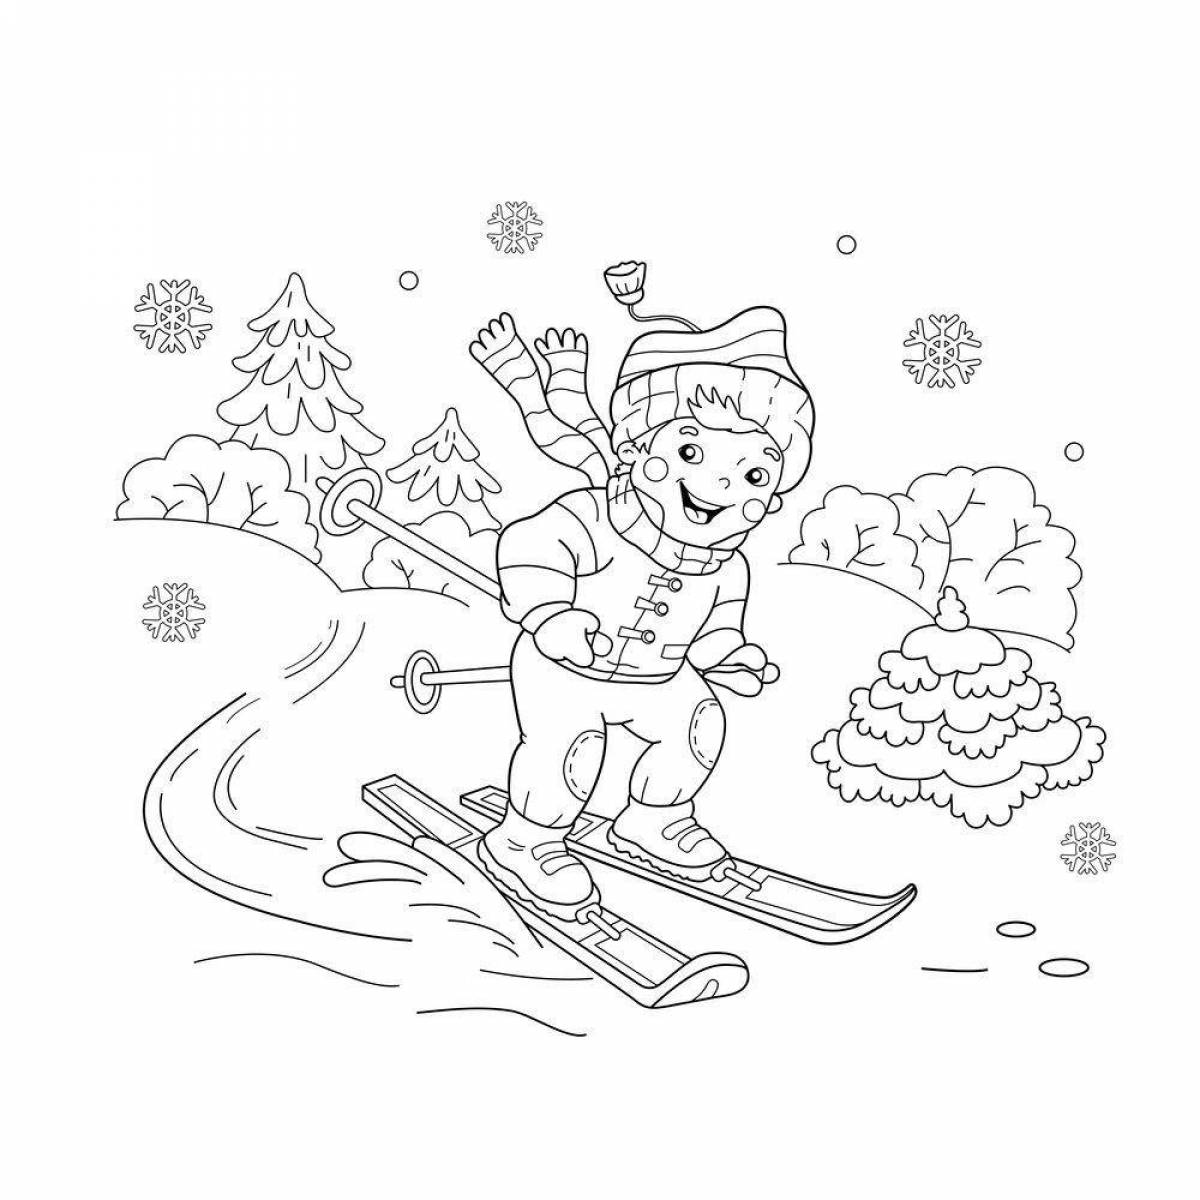 Awesome winter sports coloring page